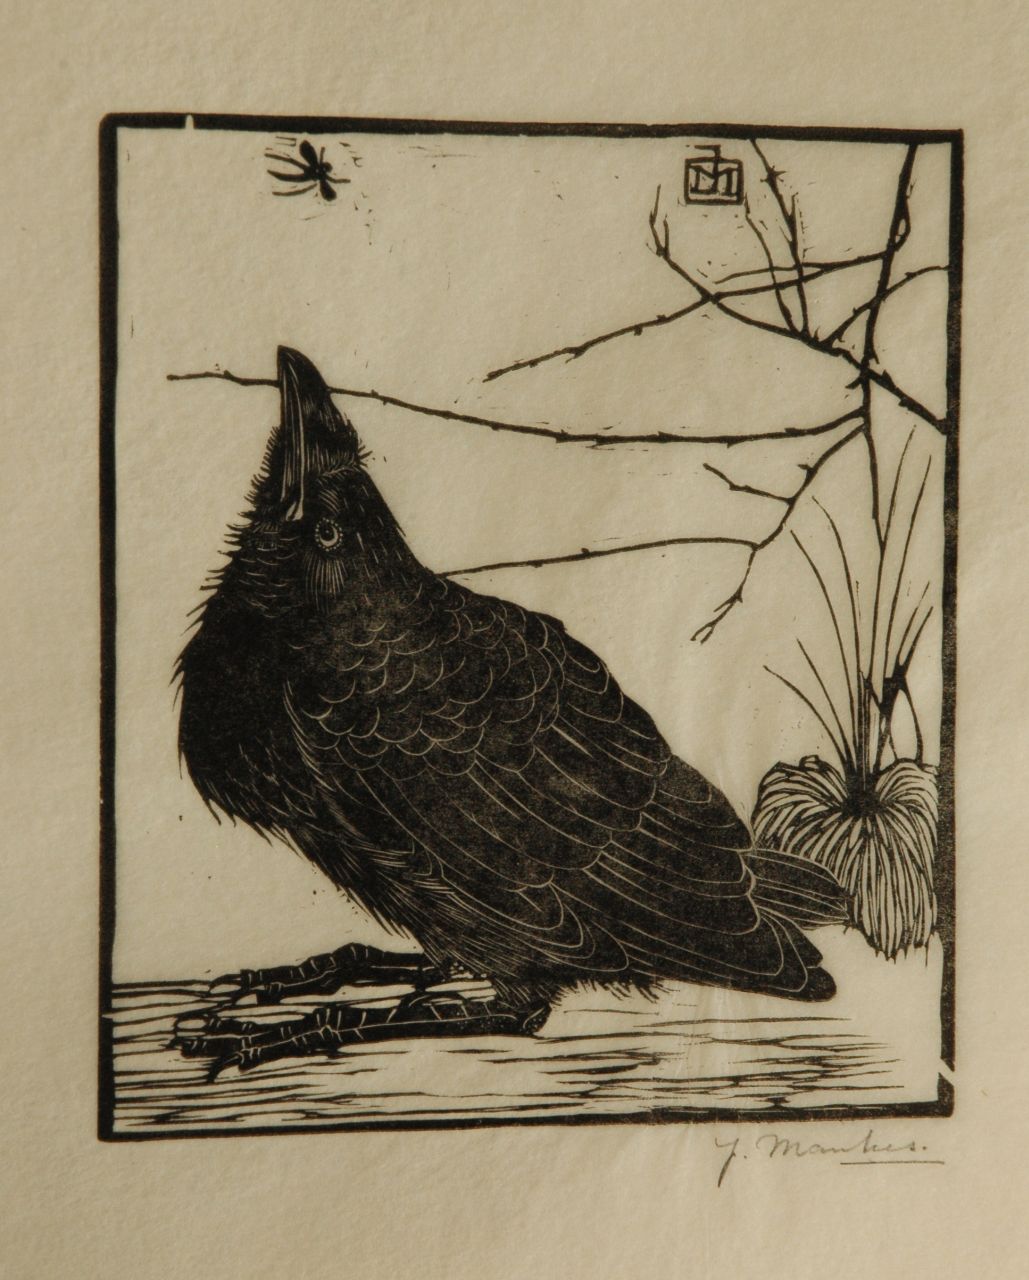 Mankes J.  | Jan Mankes, A crow watching a mosquito, Holzstich auf japanischem Papier 11,8 x 10,2 cm, signed w mon in the block and l.r. in full (in pencil und executed in 1918